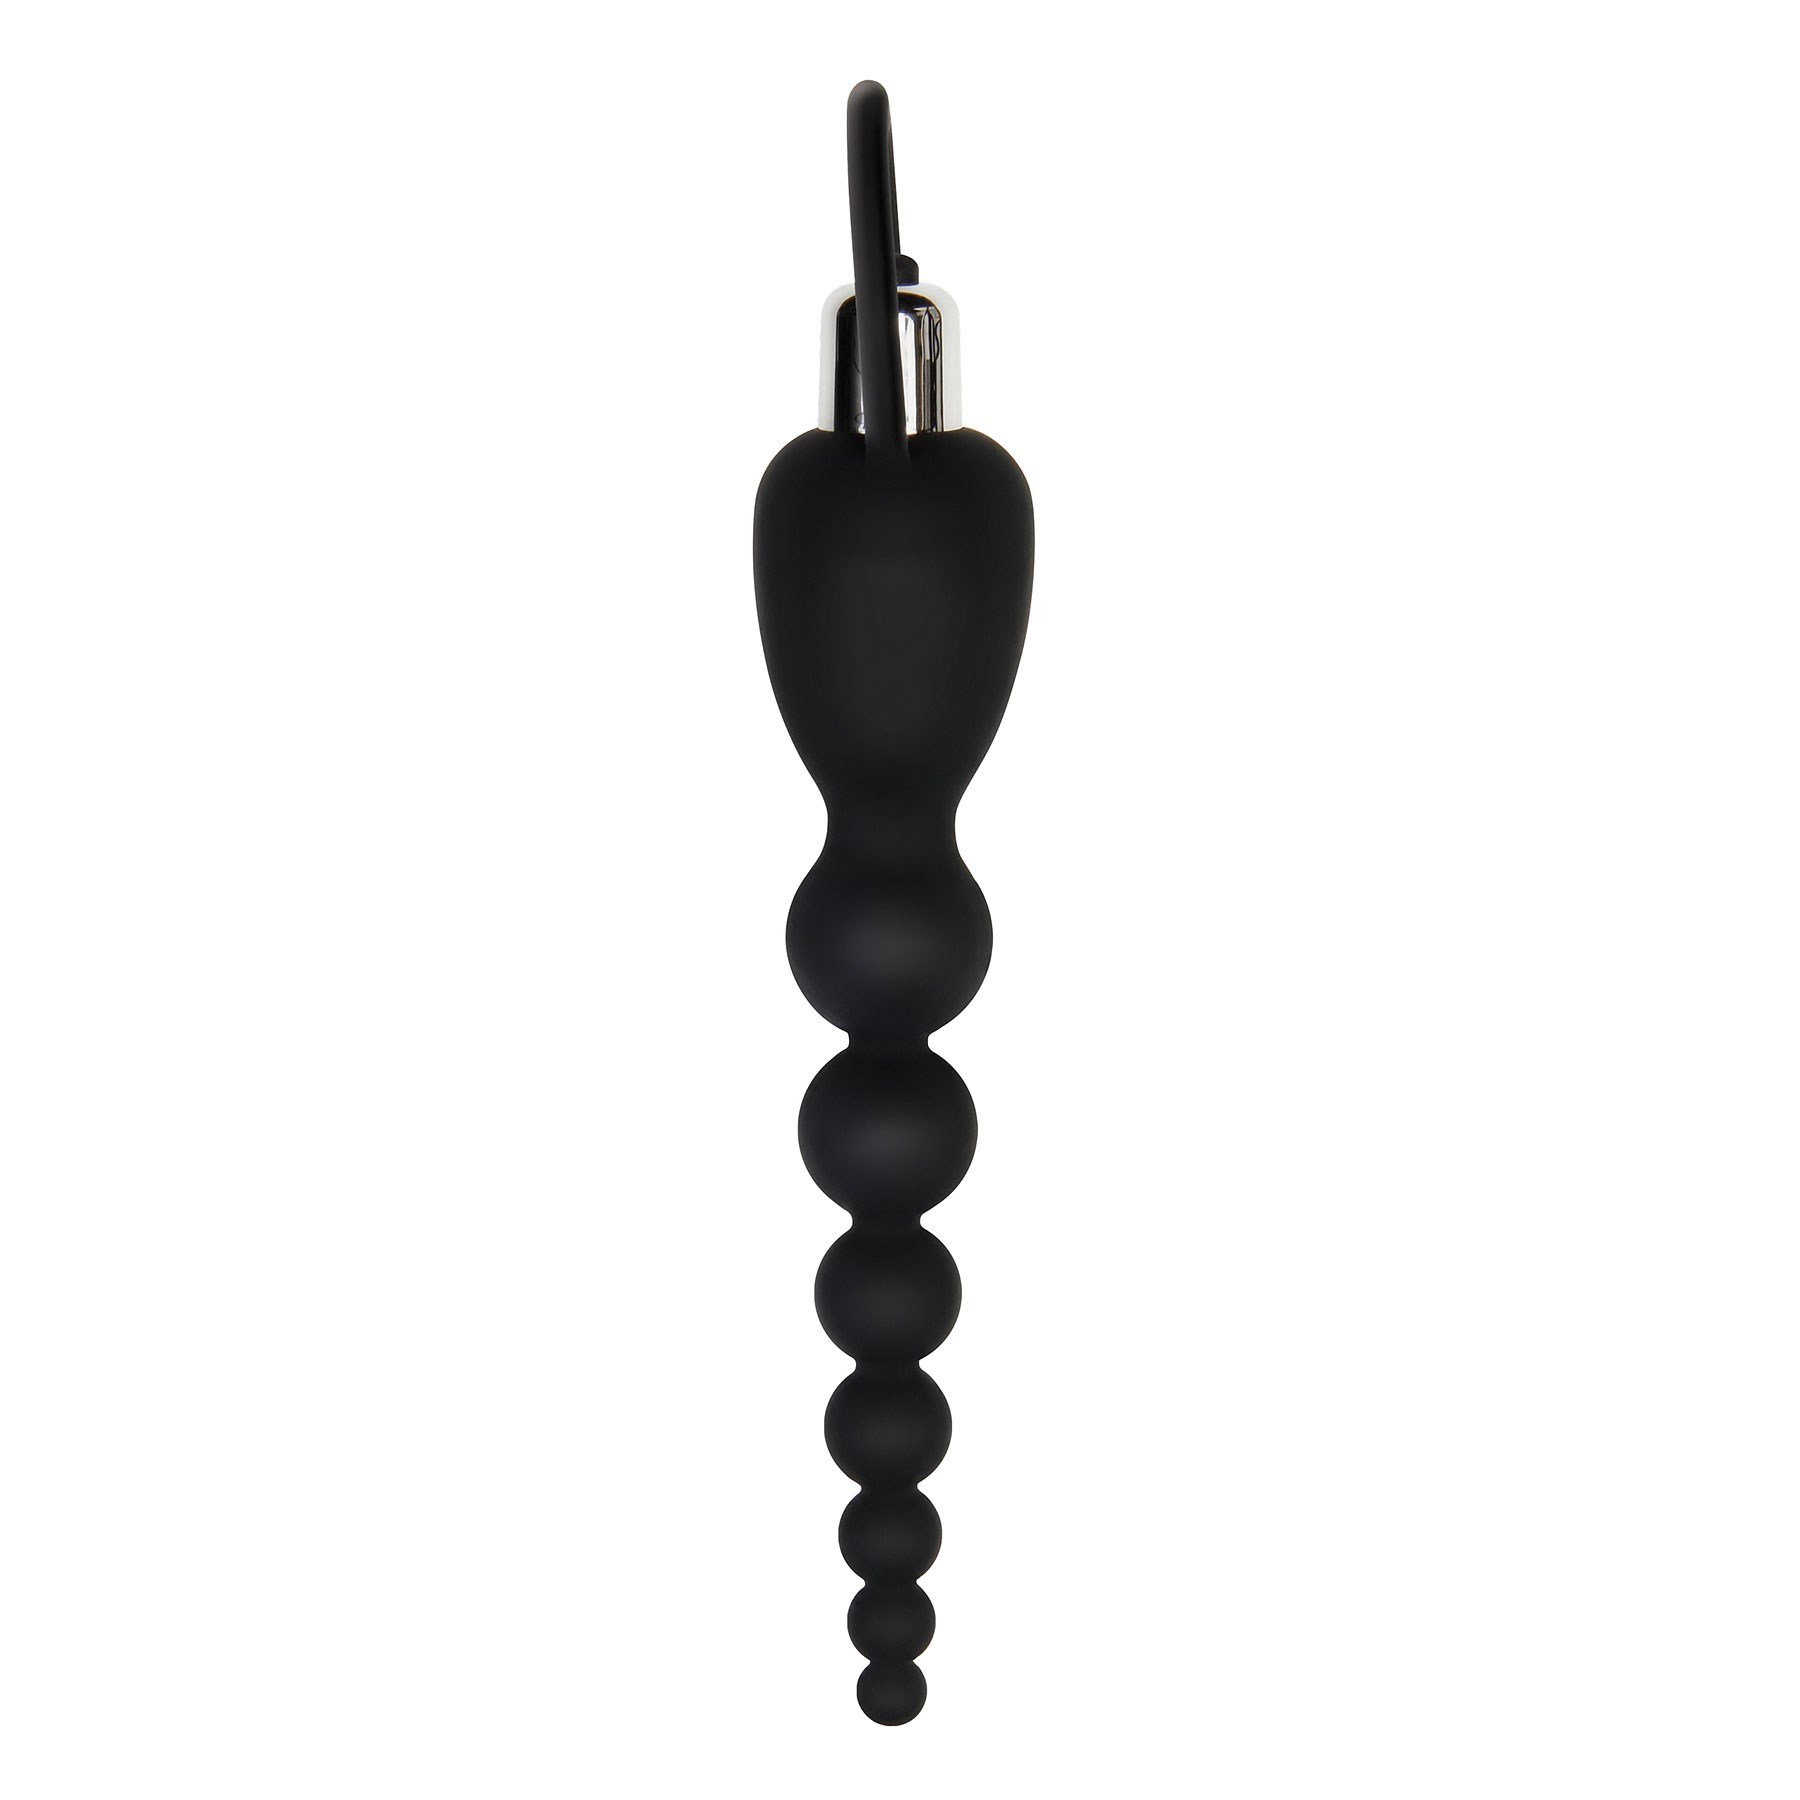 Adam & Eve Vibrating Silicone Anal Beads side angle